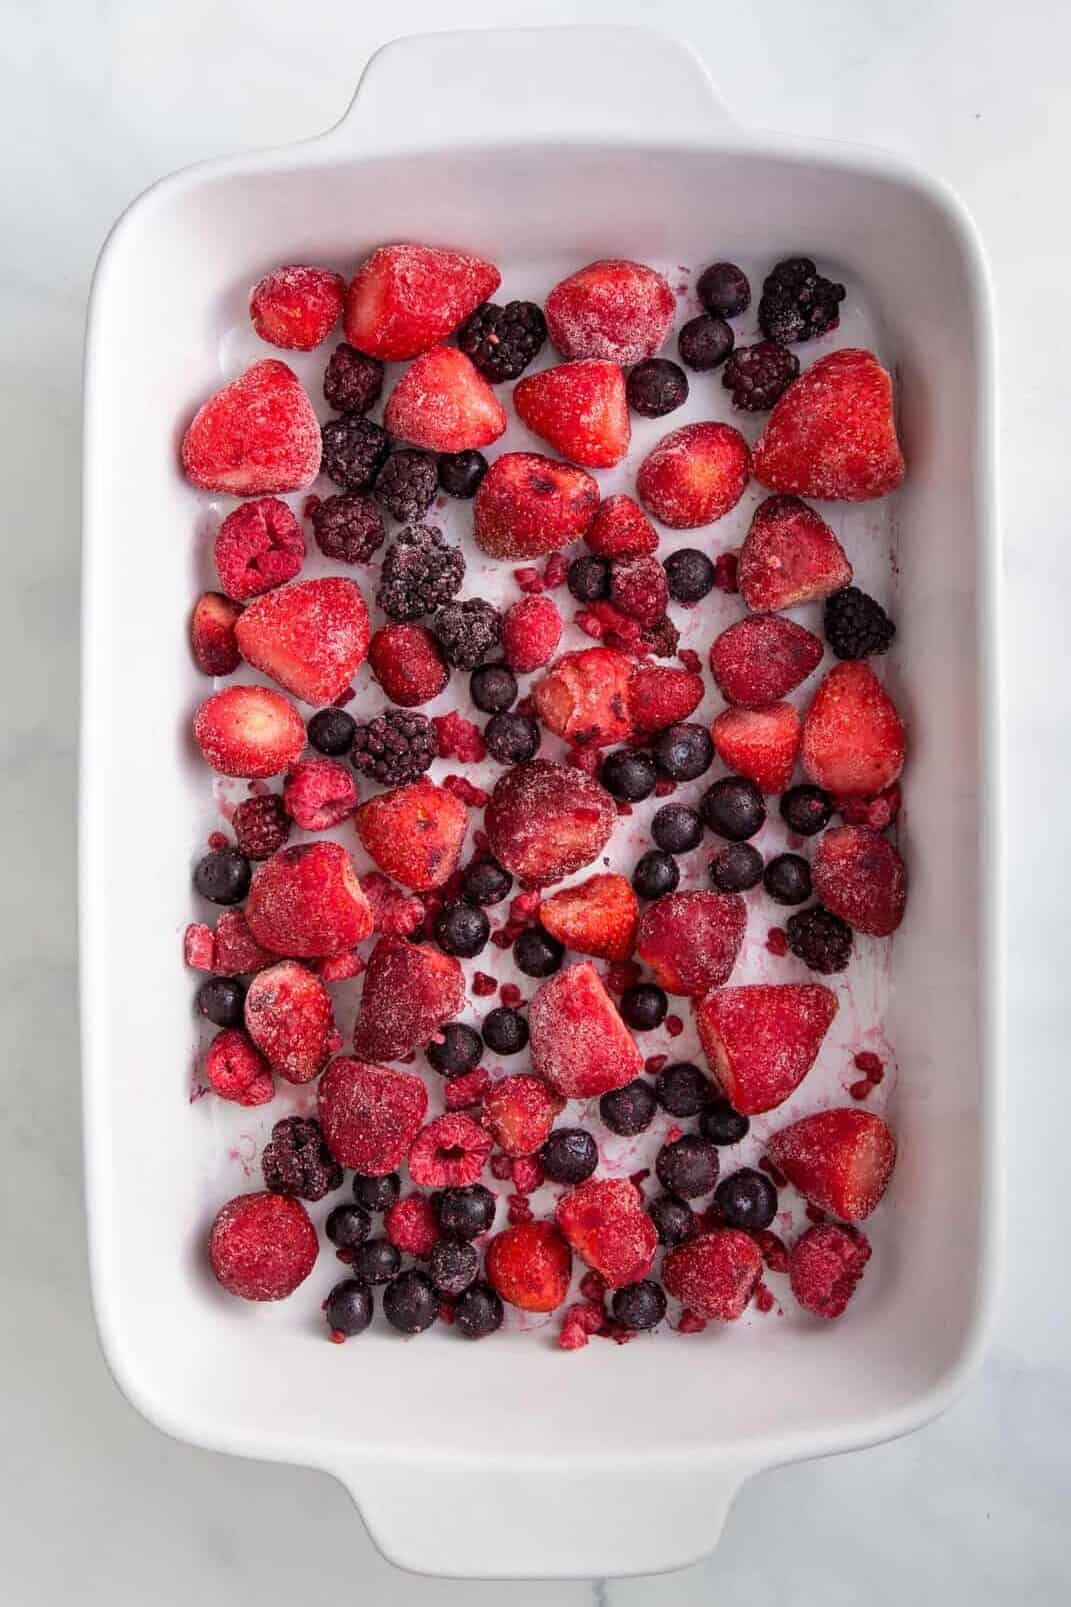 9x13 casserole dish with frozen berries spread evenly at the bottom